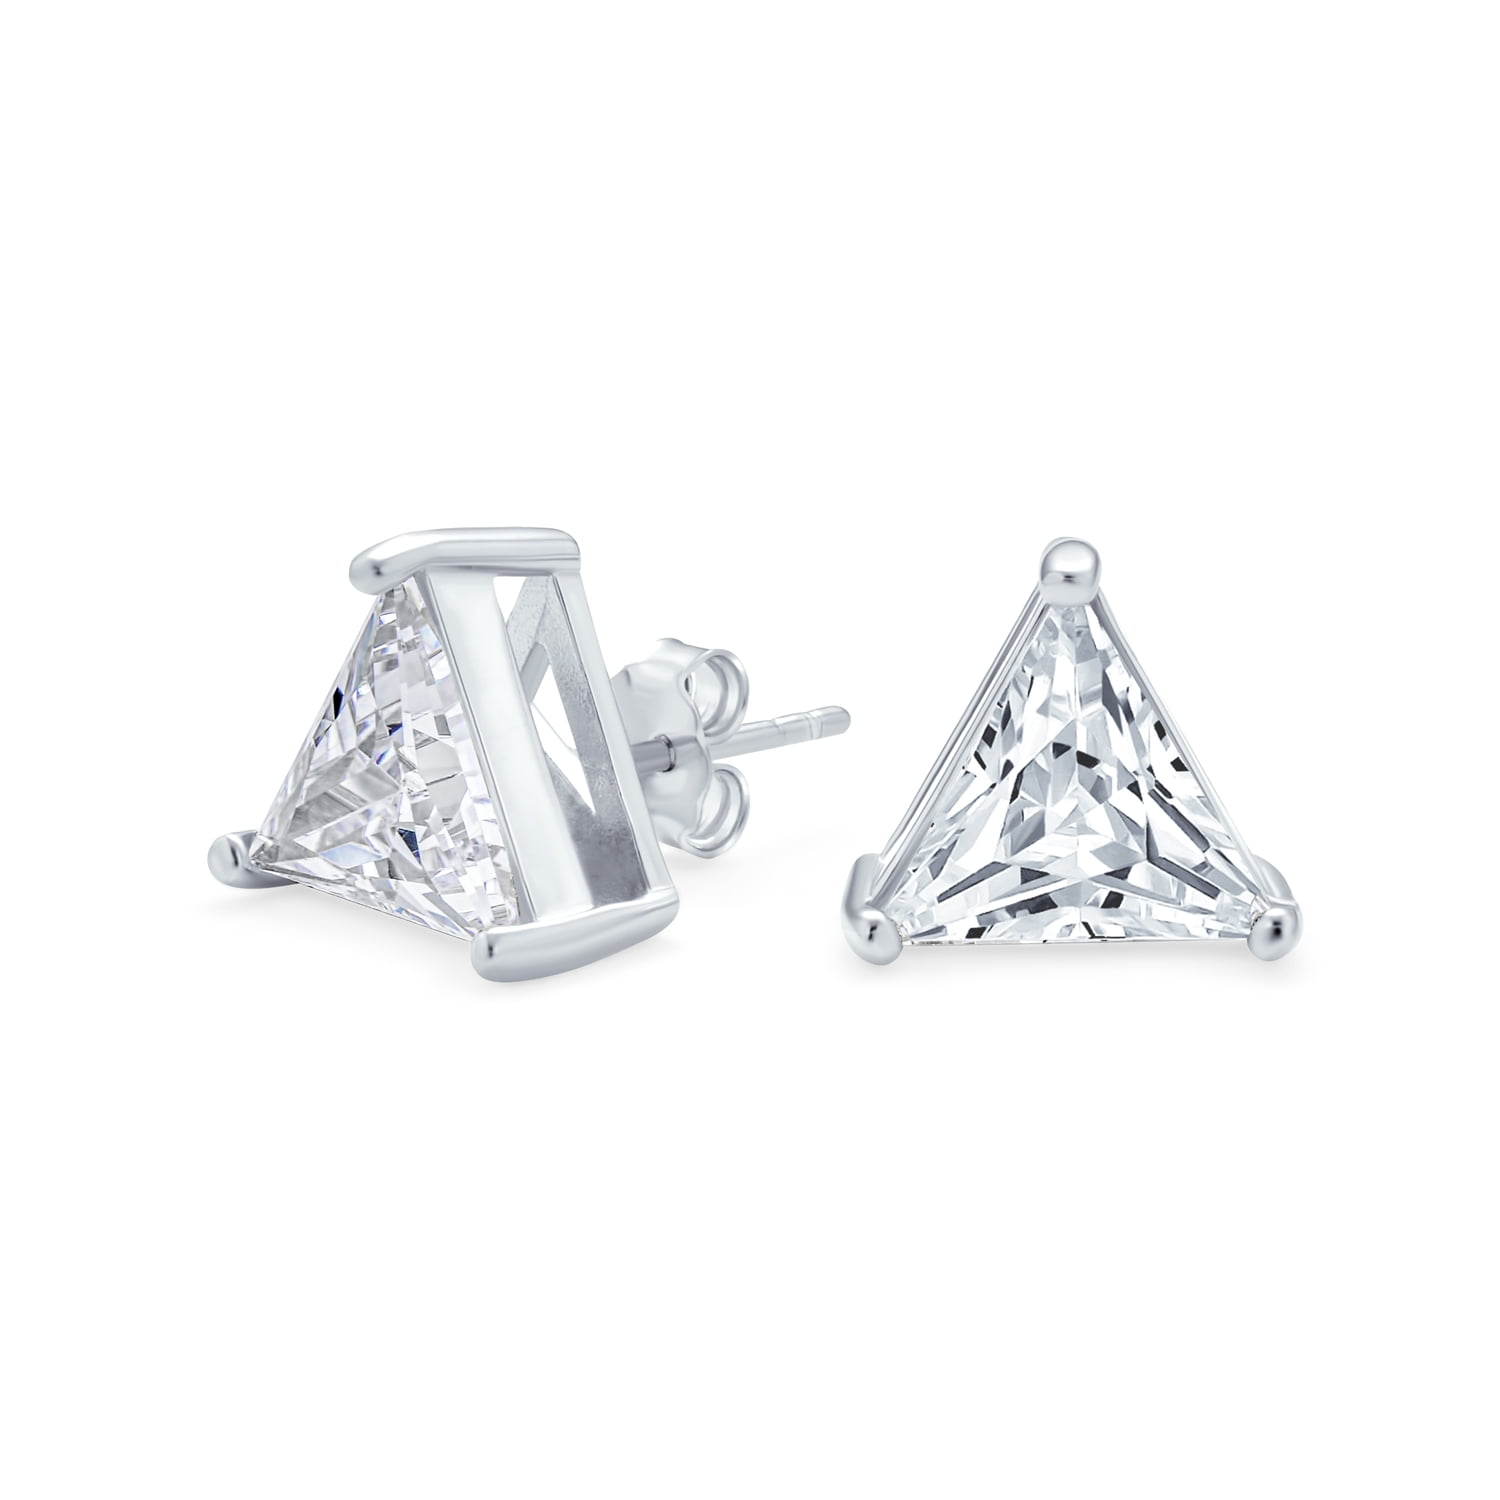 Girls Triangle Crystal Ear Studs 925 Sterling Silver Nb Of Crystal Stones 20 